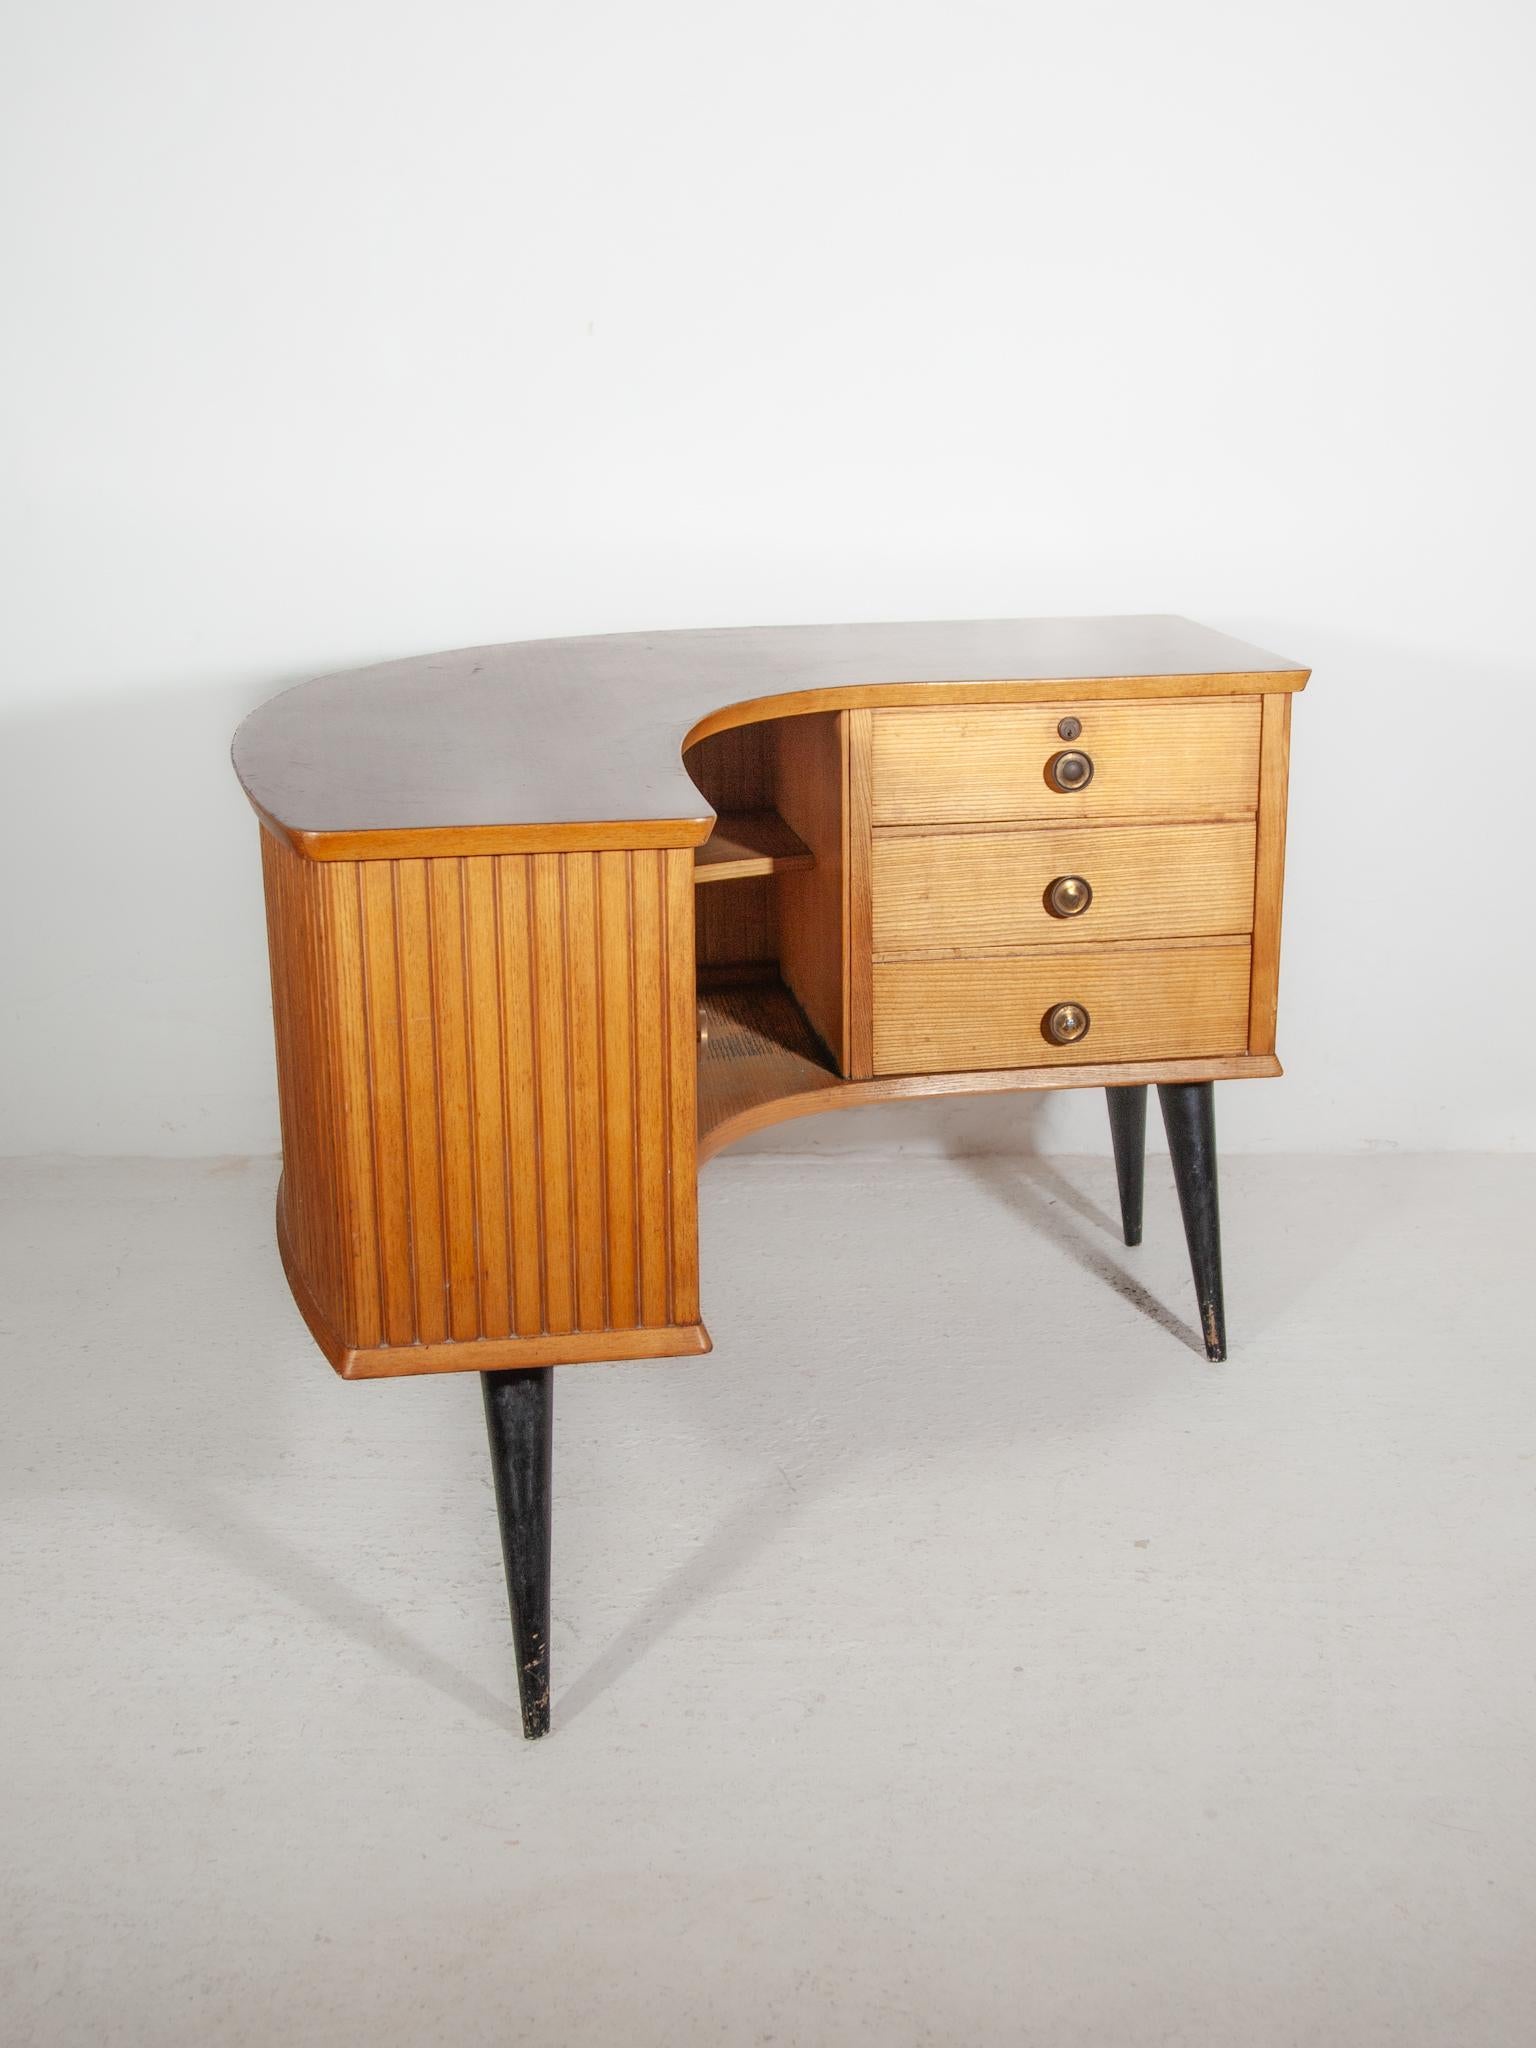 Boomerang Shaped Desk, Shop Counter, 1950s by Alfred Hendrickx For Sale 3